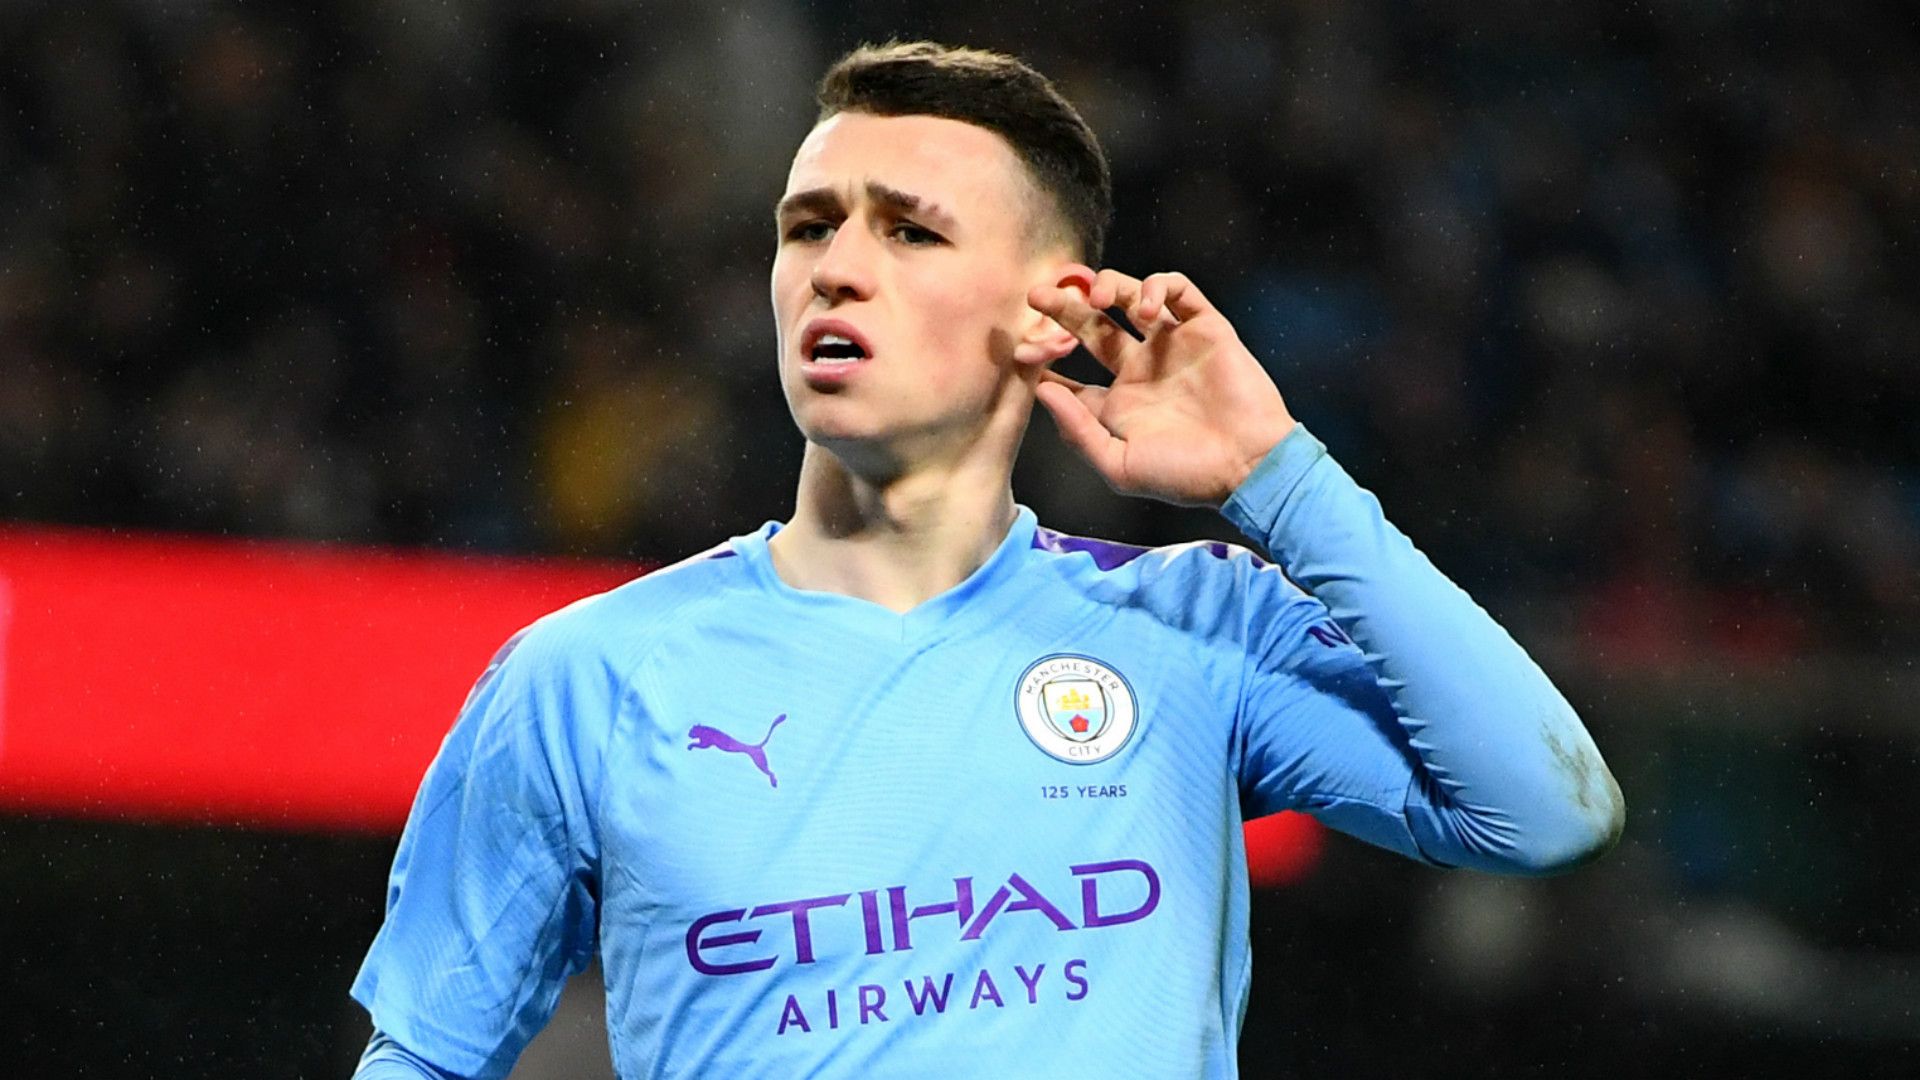 Guardiola: Foden will be an important player for Man City for the next decade